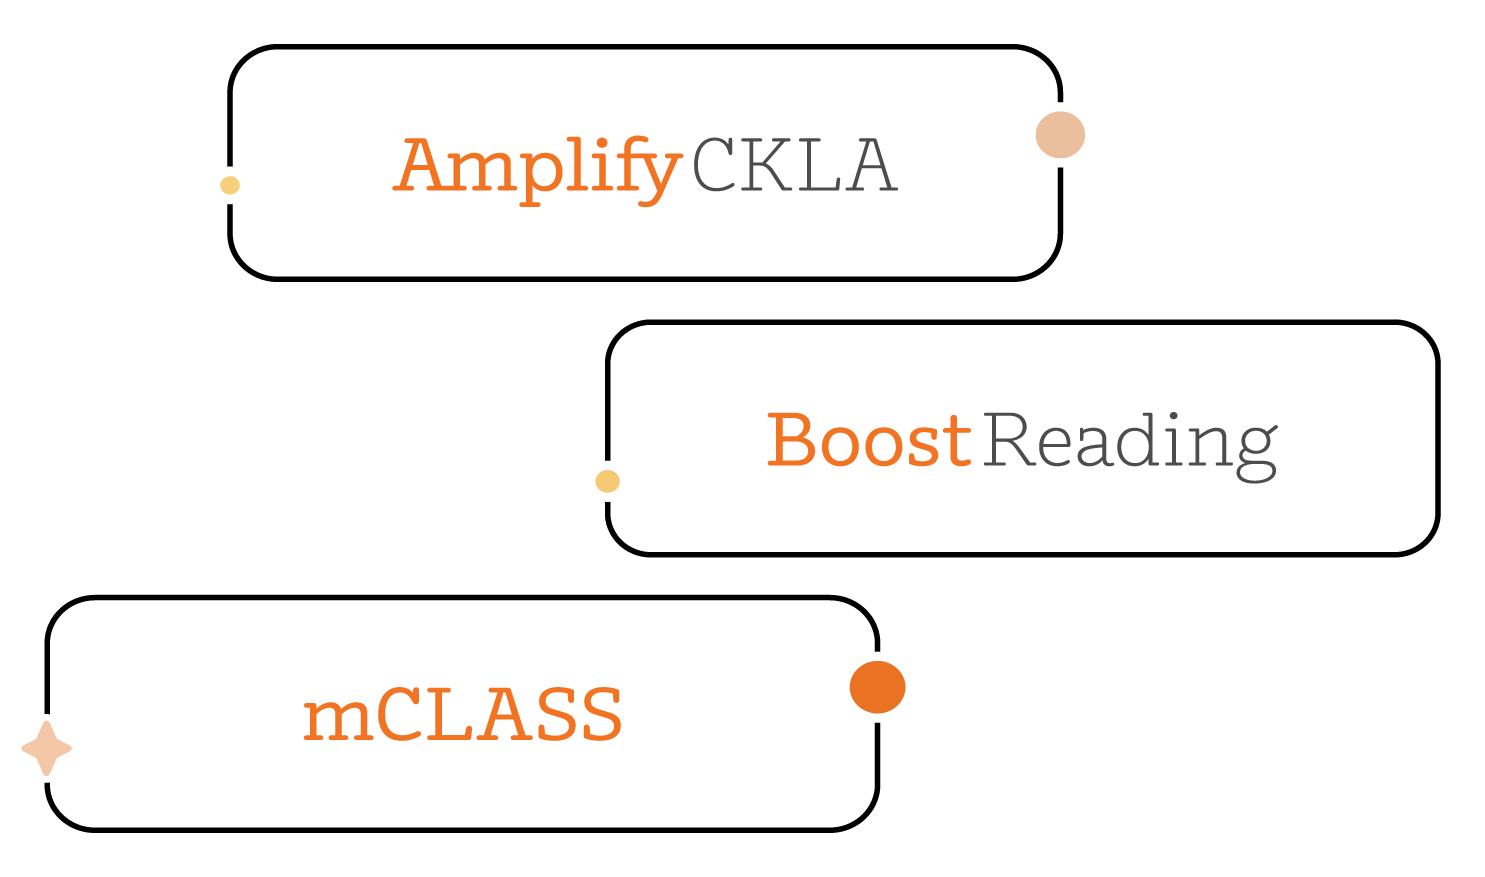 An image of K–5 personalized reading curriculum for Multi-Tiered System of Supports in the classroom.